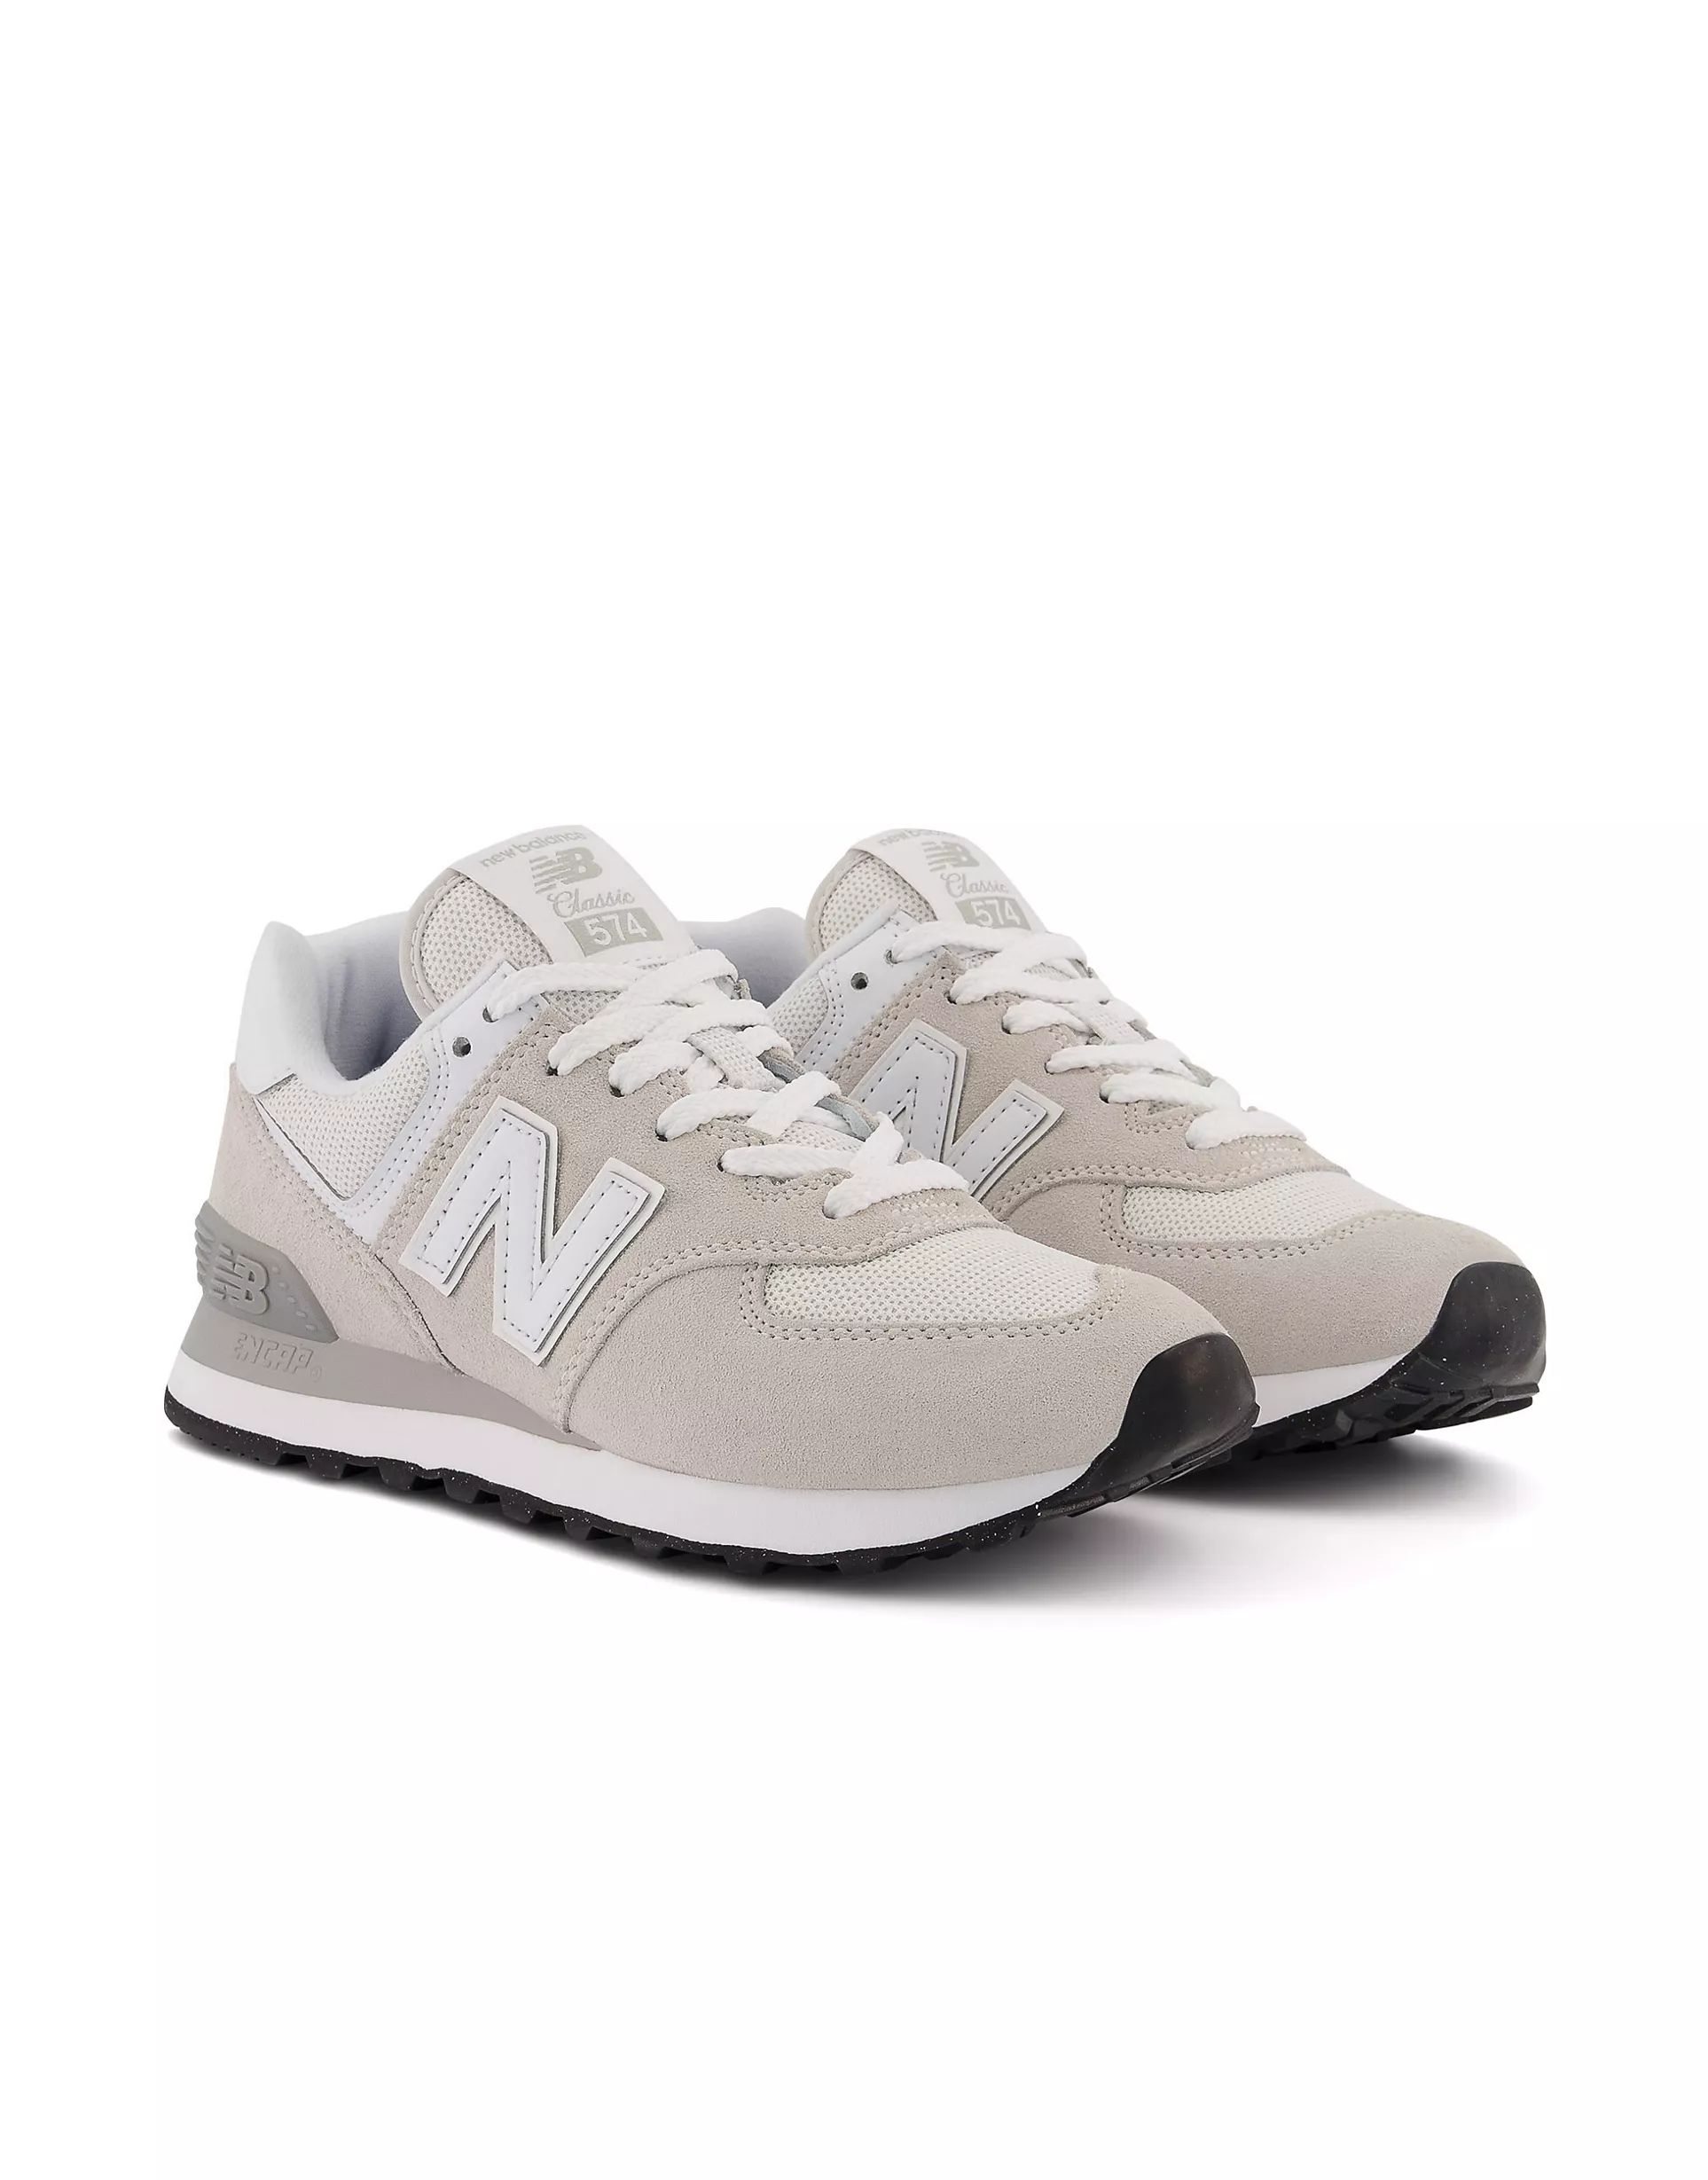 New Balance 574 sneakers in off white and grey - CREAM | ASOS | ASOS (Global)